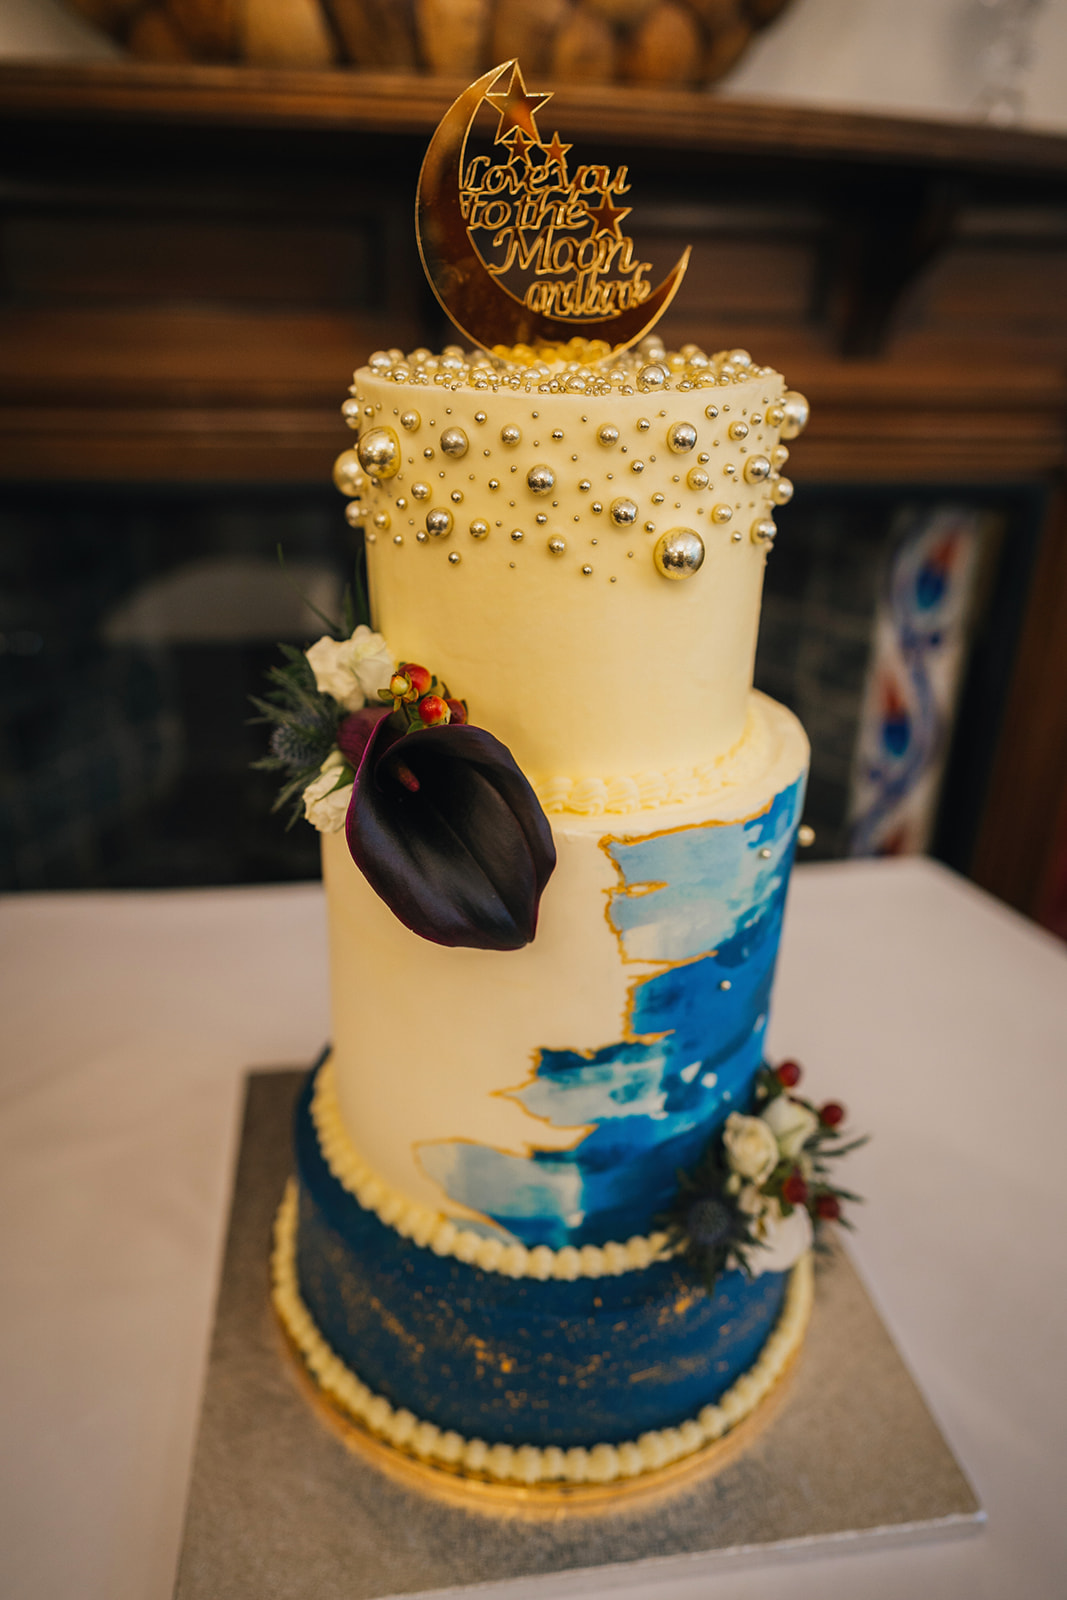 three tiered wedding cake with blue and ivory icing